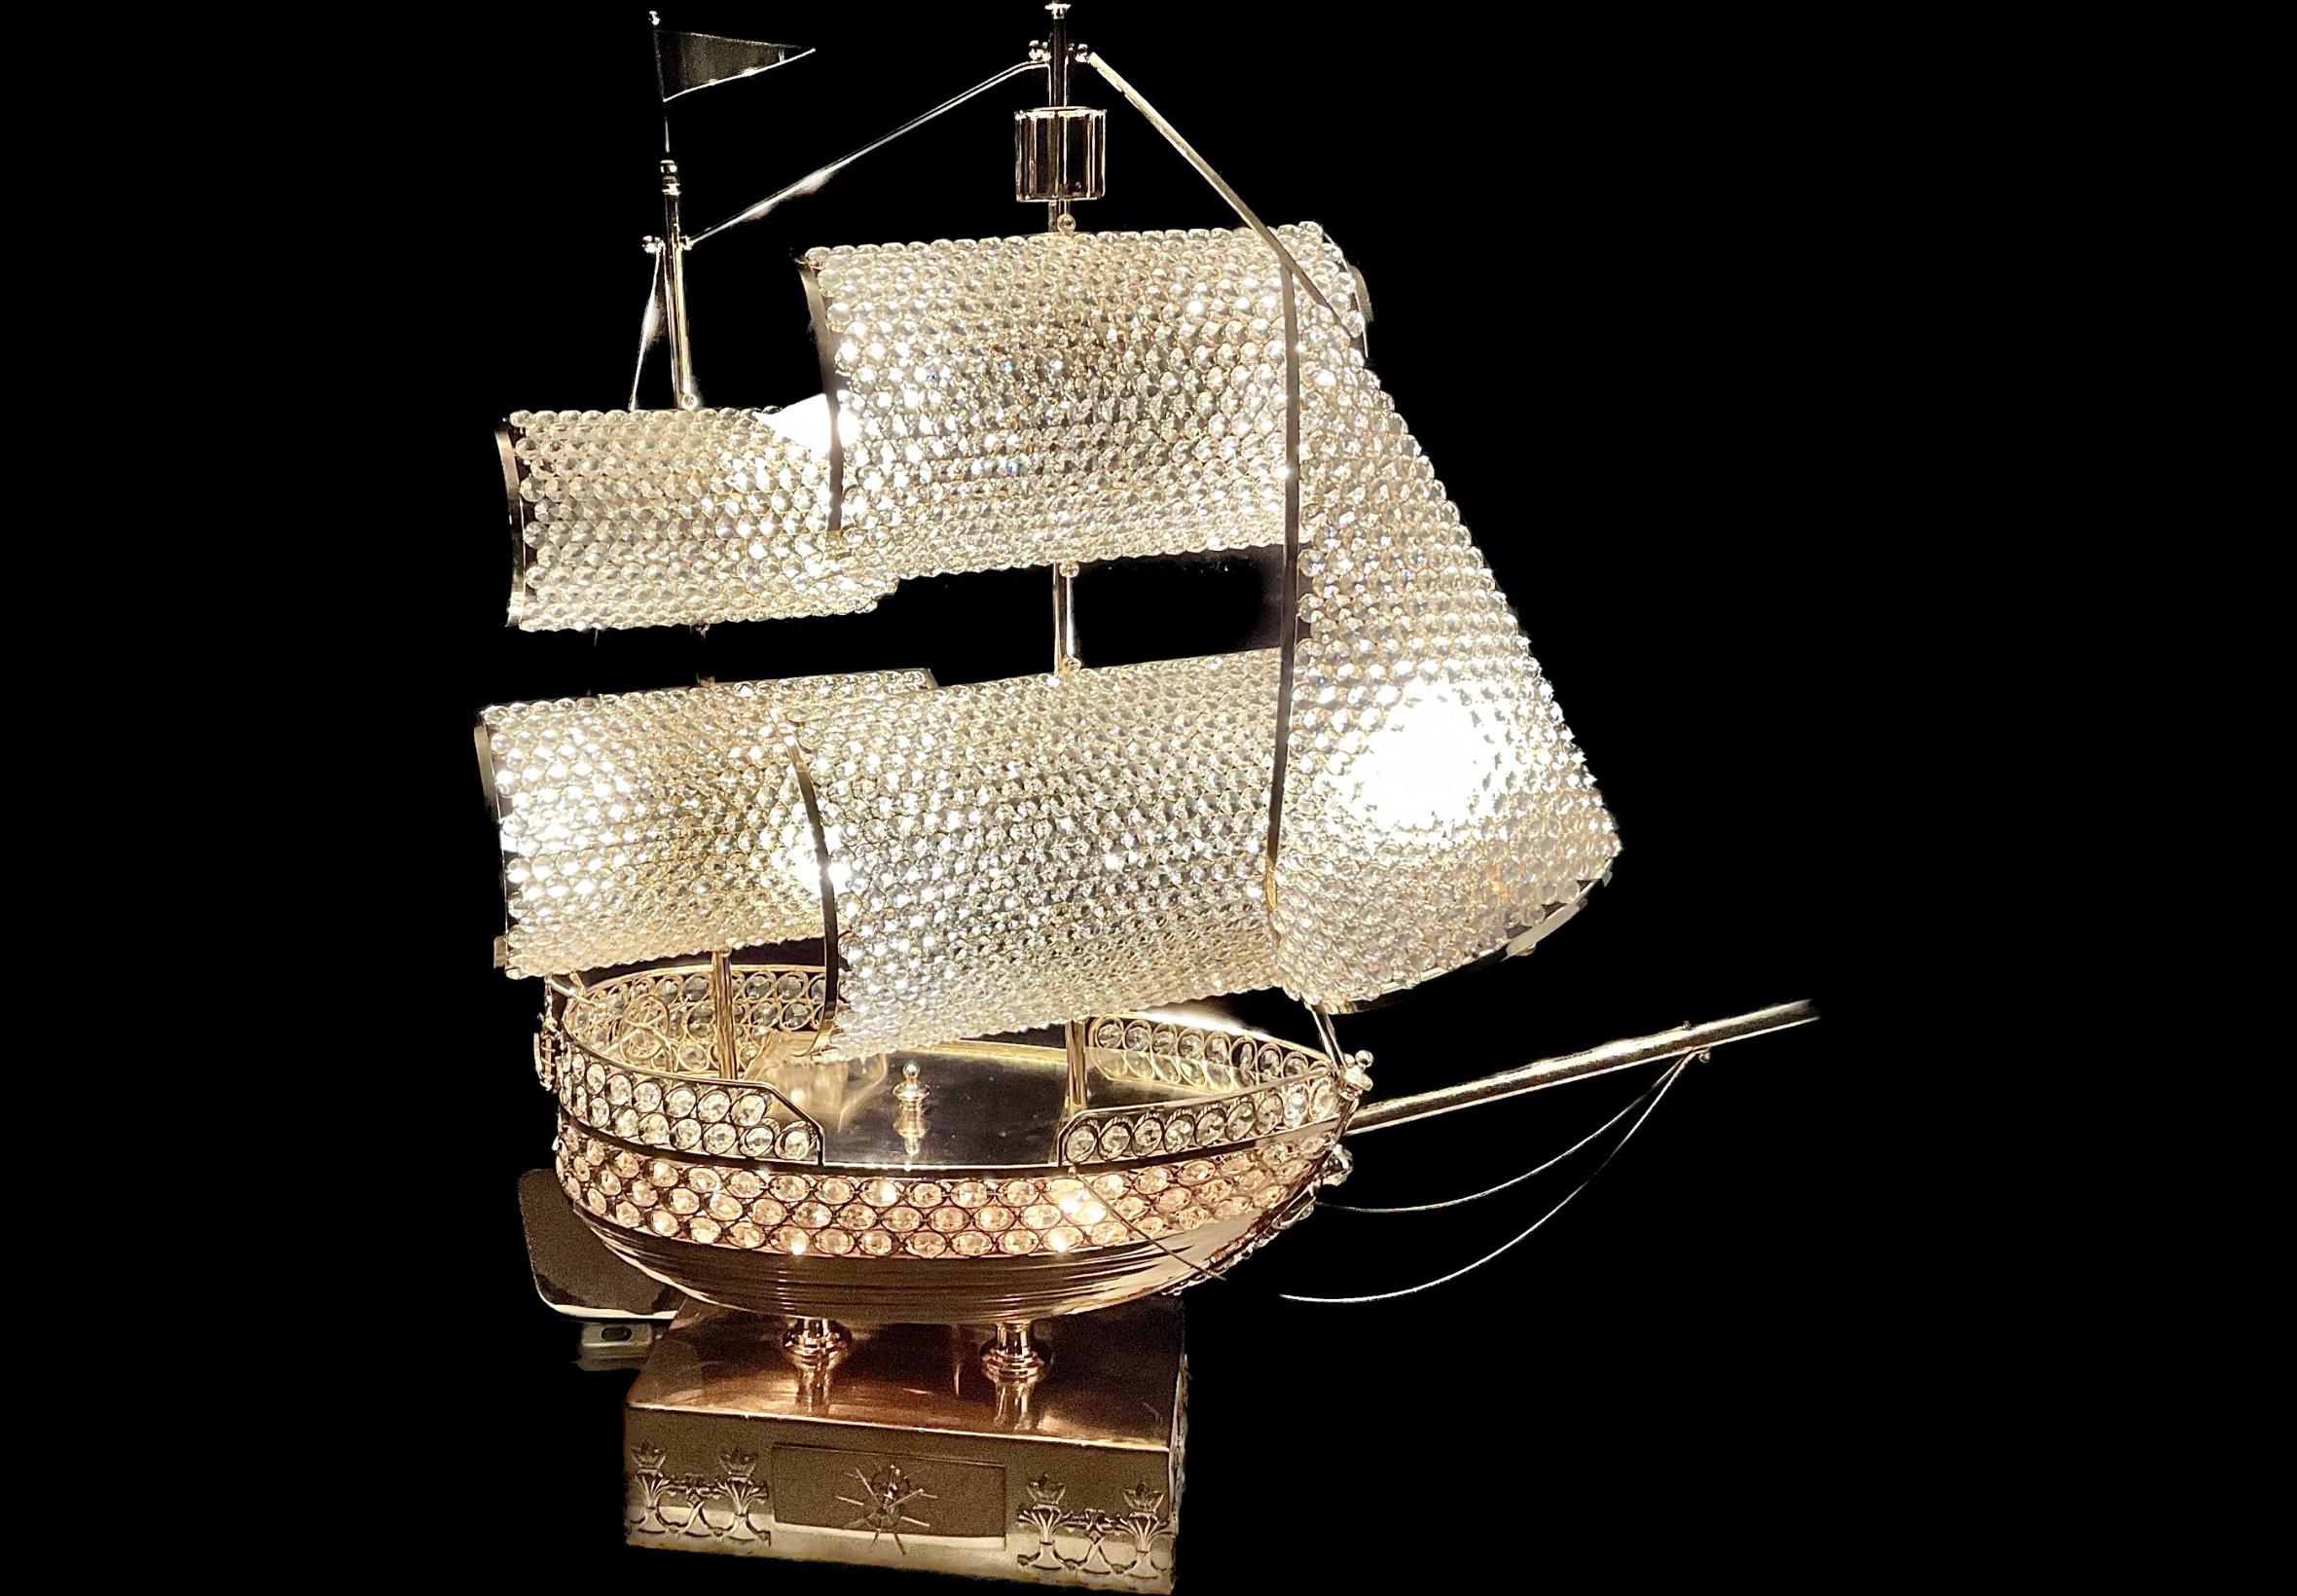 Exceptional and Unique rare large French gilt and crystal sailing ship lamp. Thirteen socket electric figural lamp fashioned as a gilt ship hung with crystal bead sails. Mounted on a base containing a drawer with a ship's wheel handle. Wired with